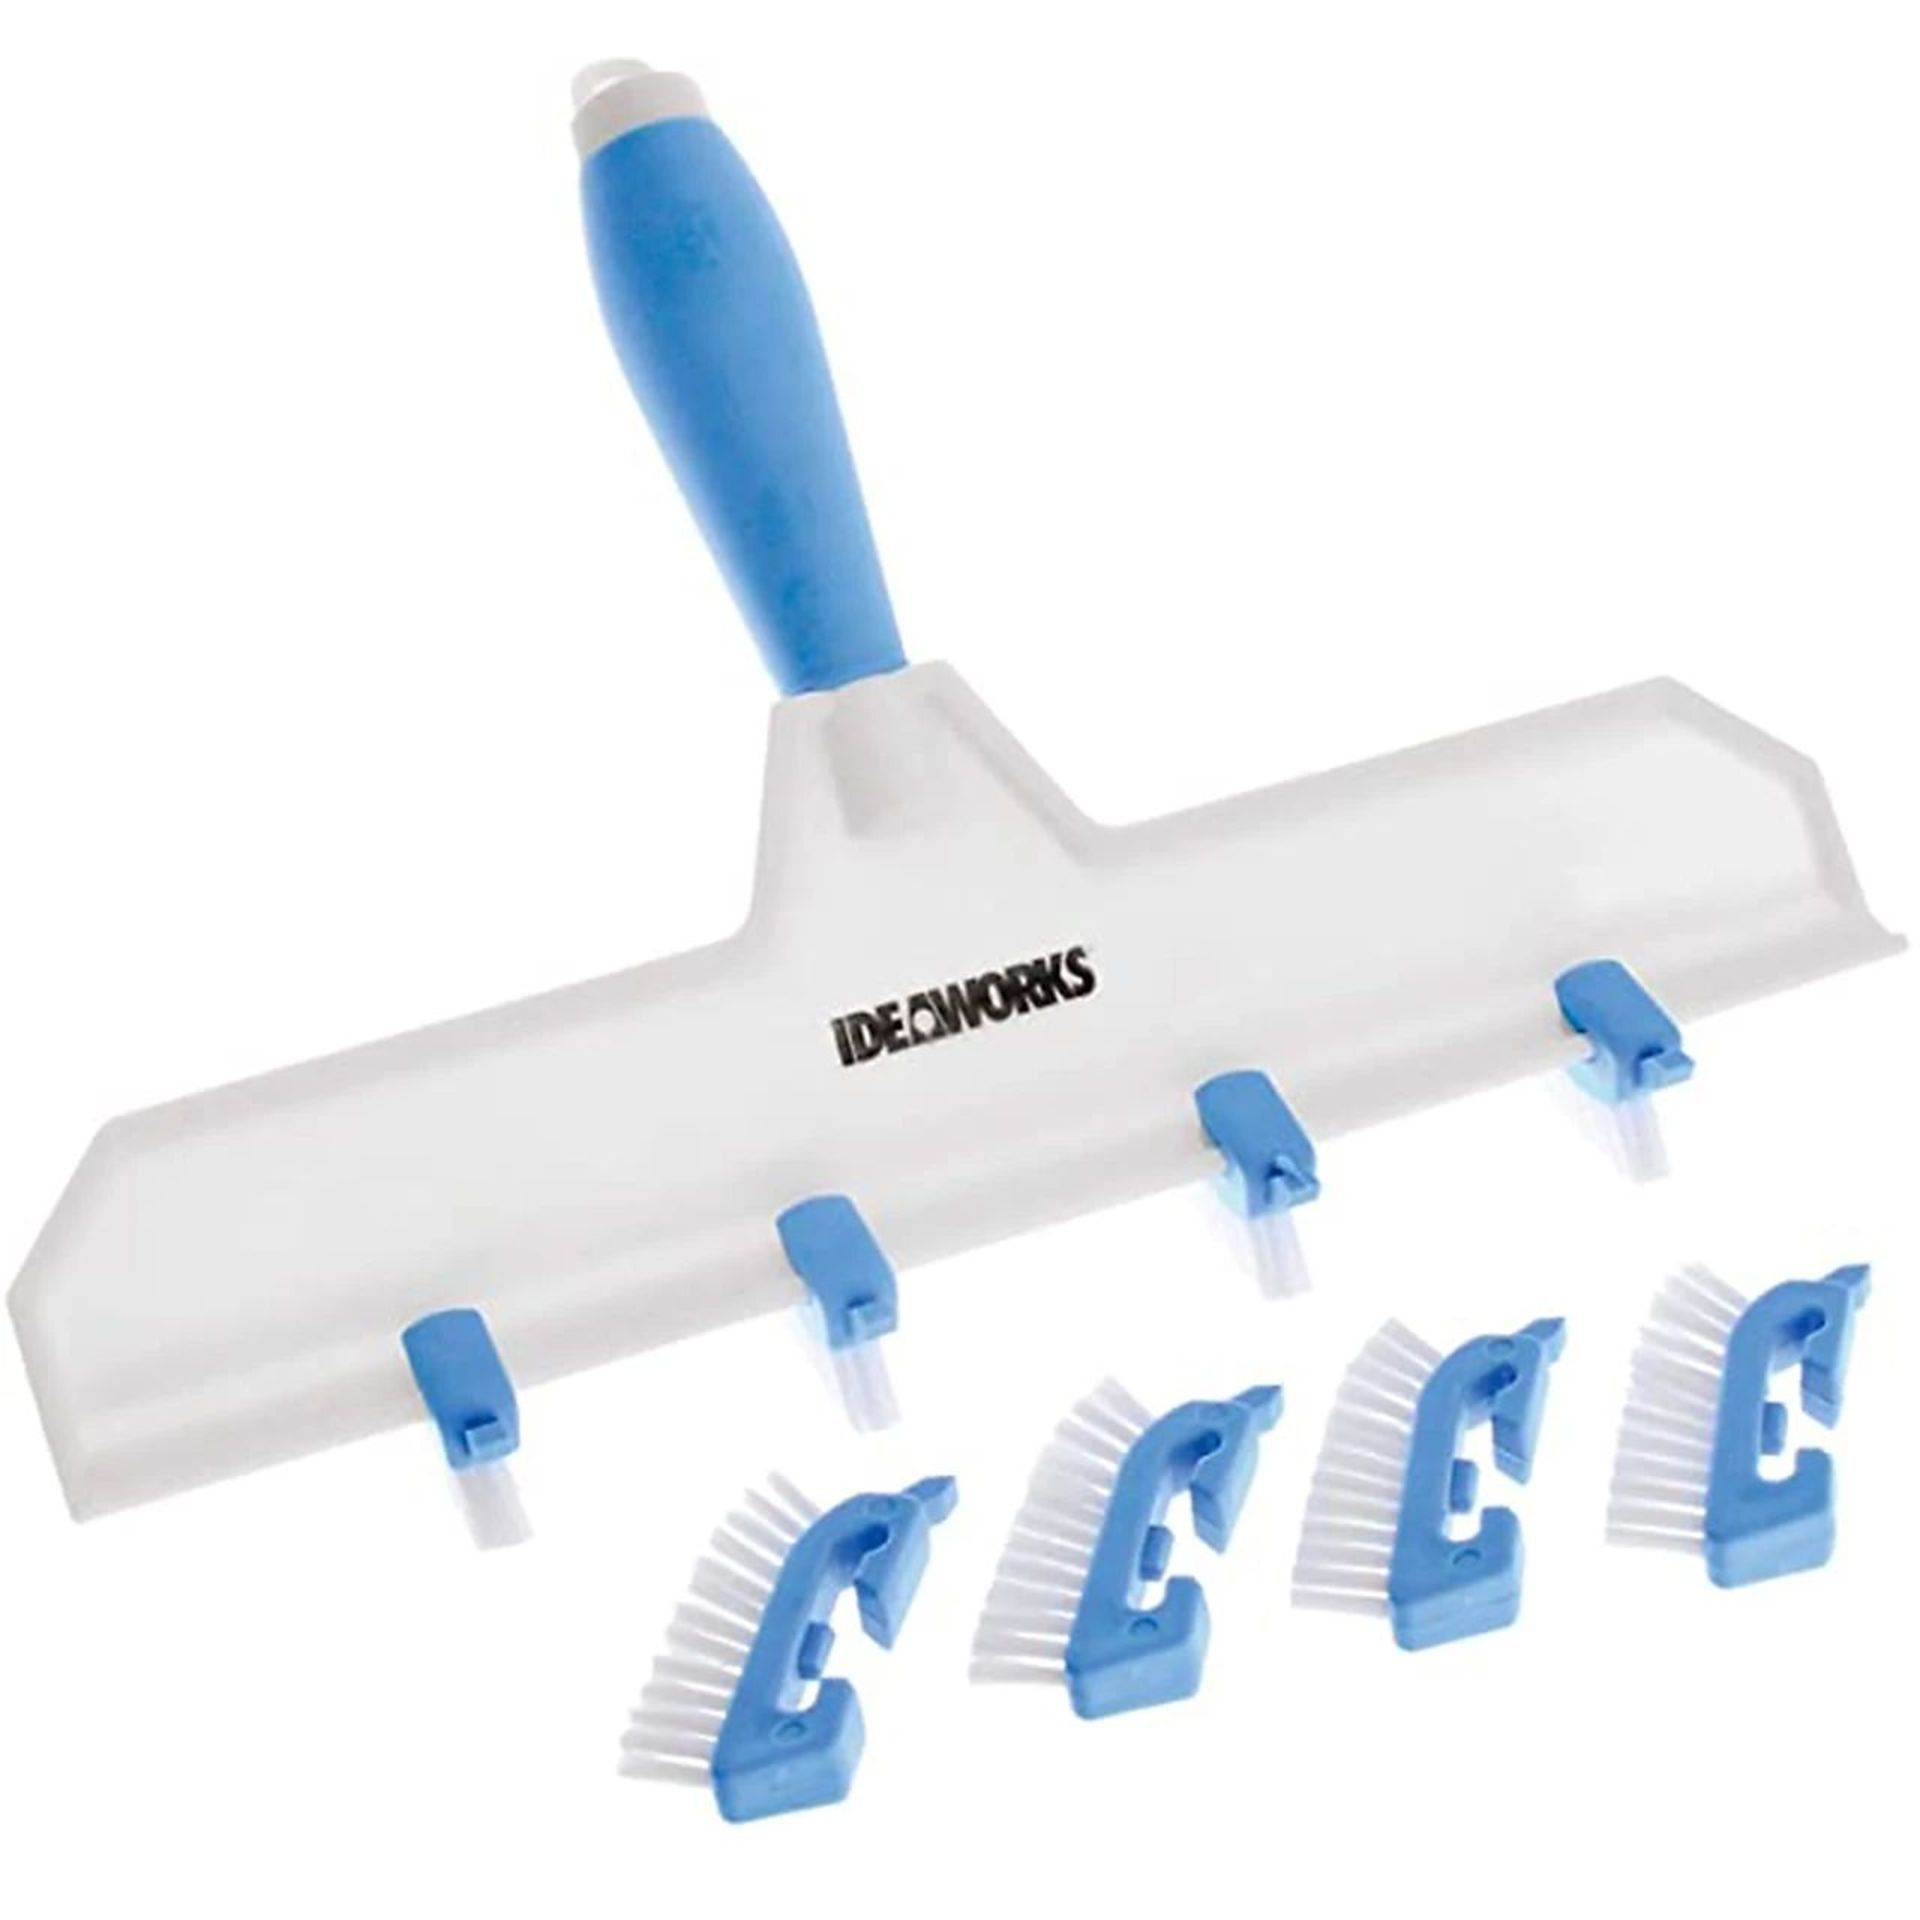 10 X BRAND NEW ADJUSTABLE HANDHELD GROUT CLEANING TOOLWITH SOFT GRIP HANDLE AND 8 MINI BRUSH HEADS - Image 3 of 3